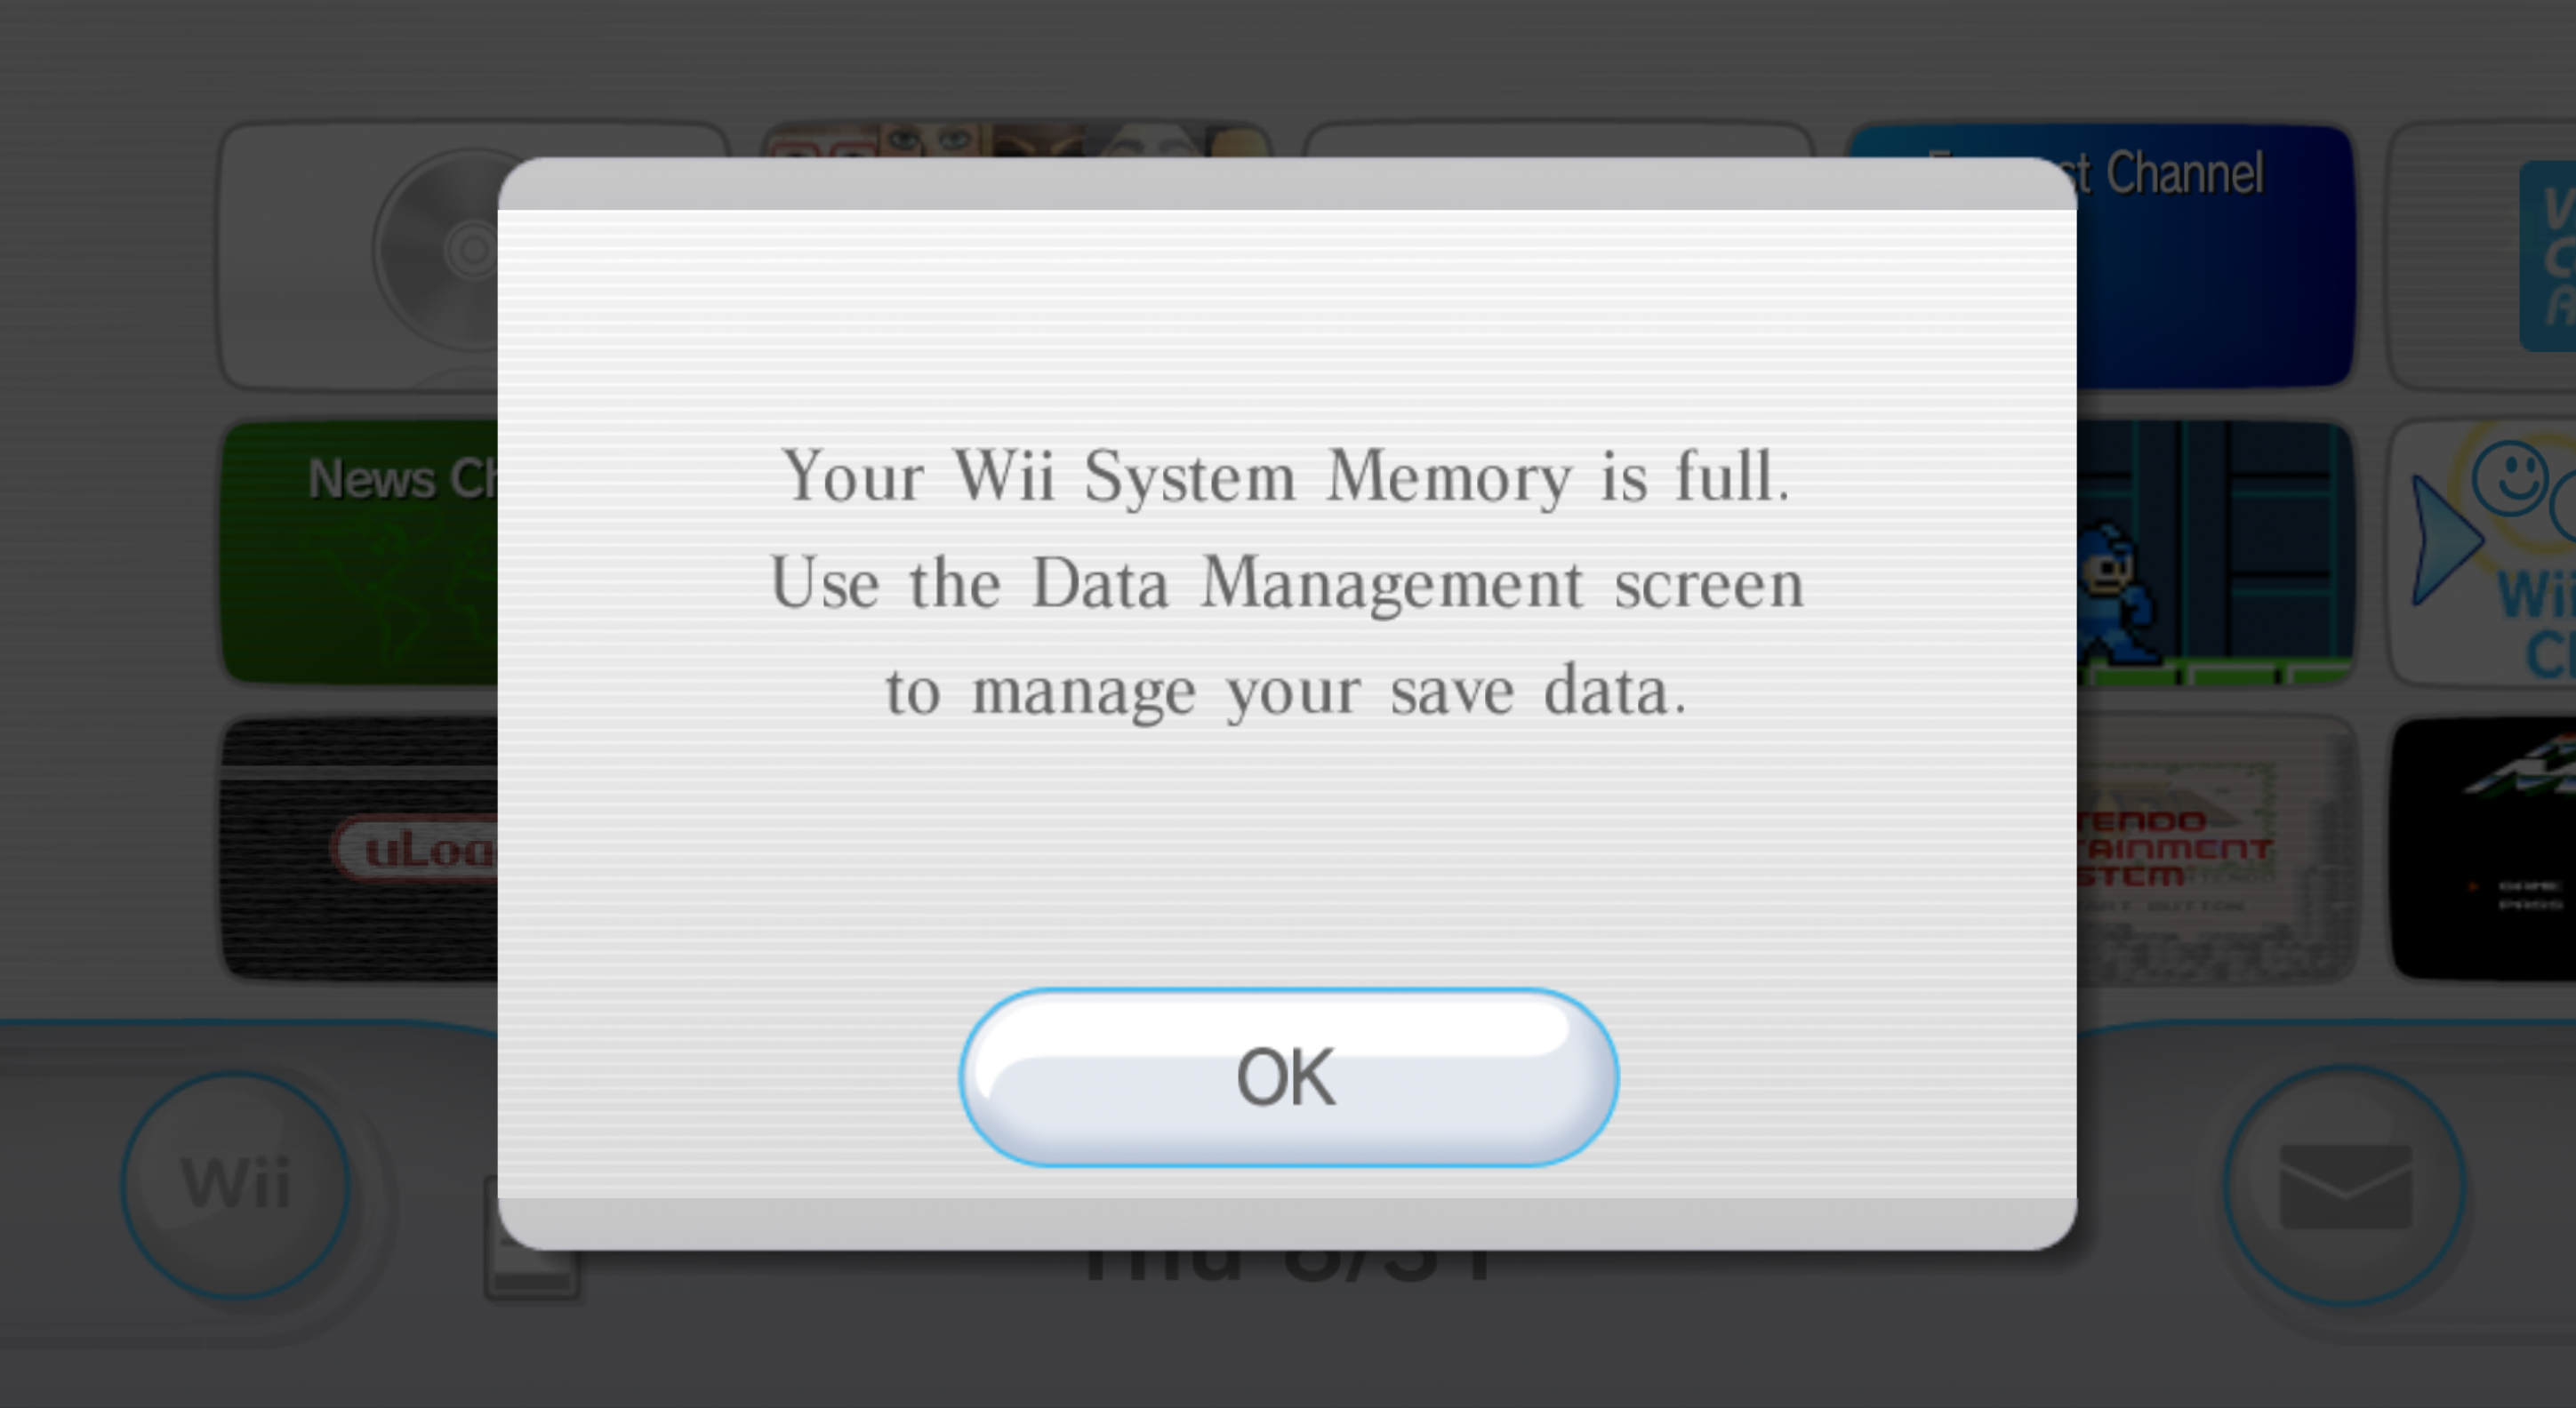 dolphin emulator memory card is corrupted